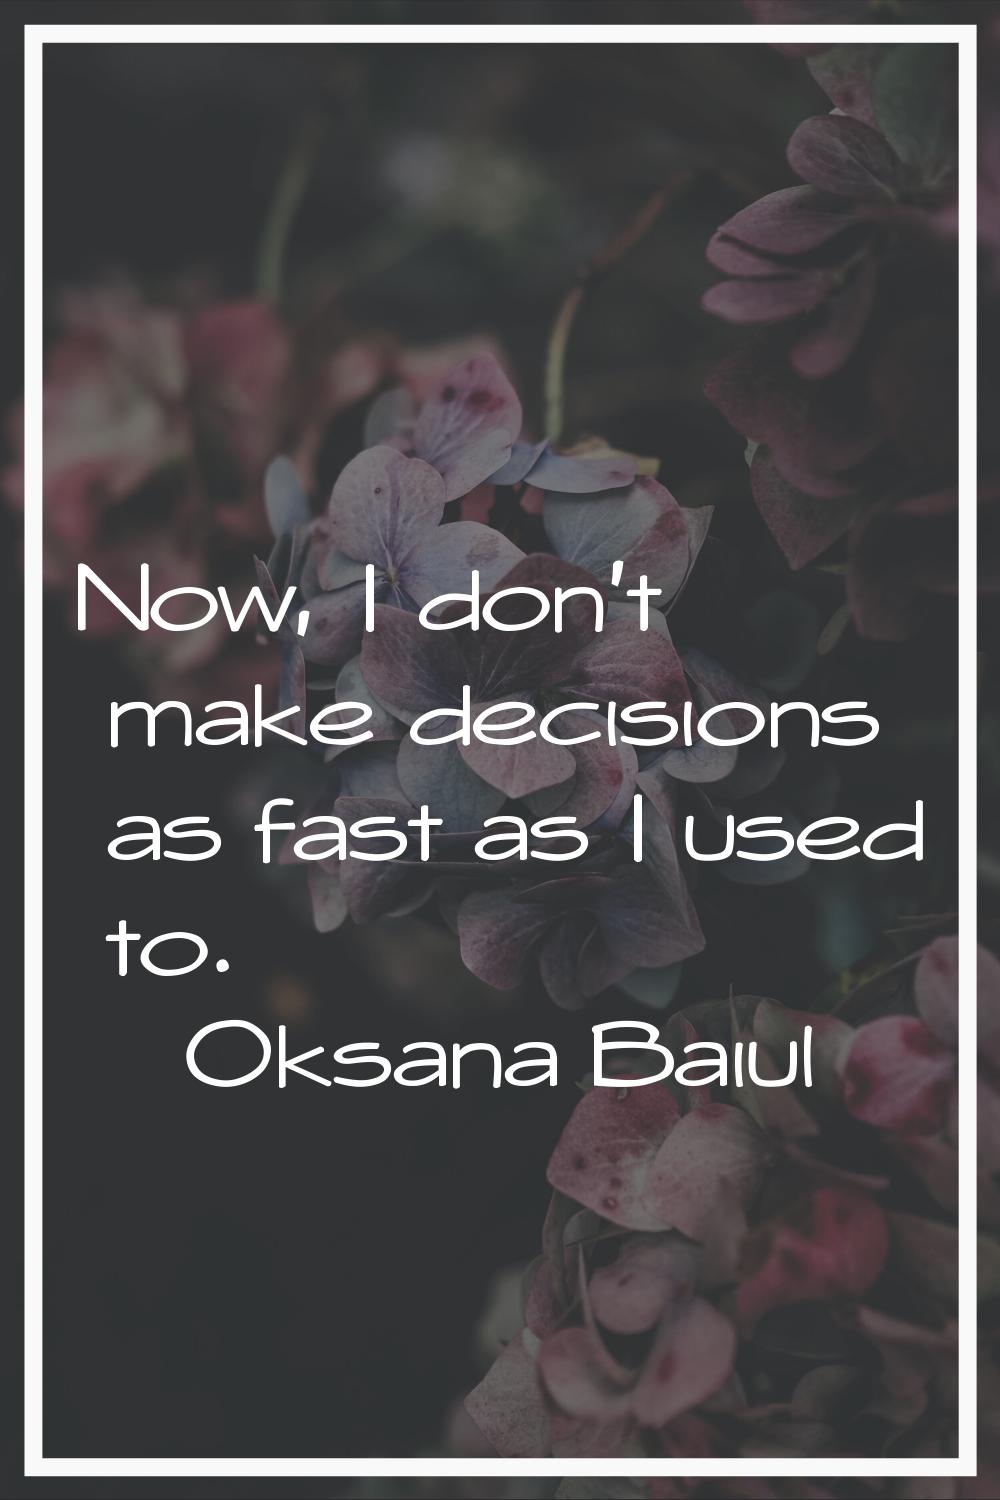 Now, I don't make decisions as fast as I used to.